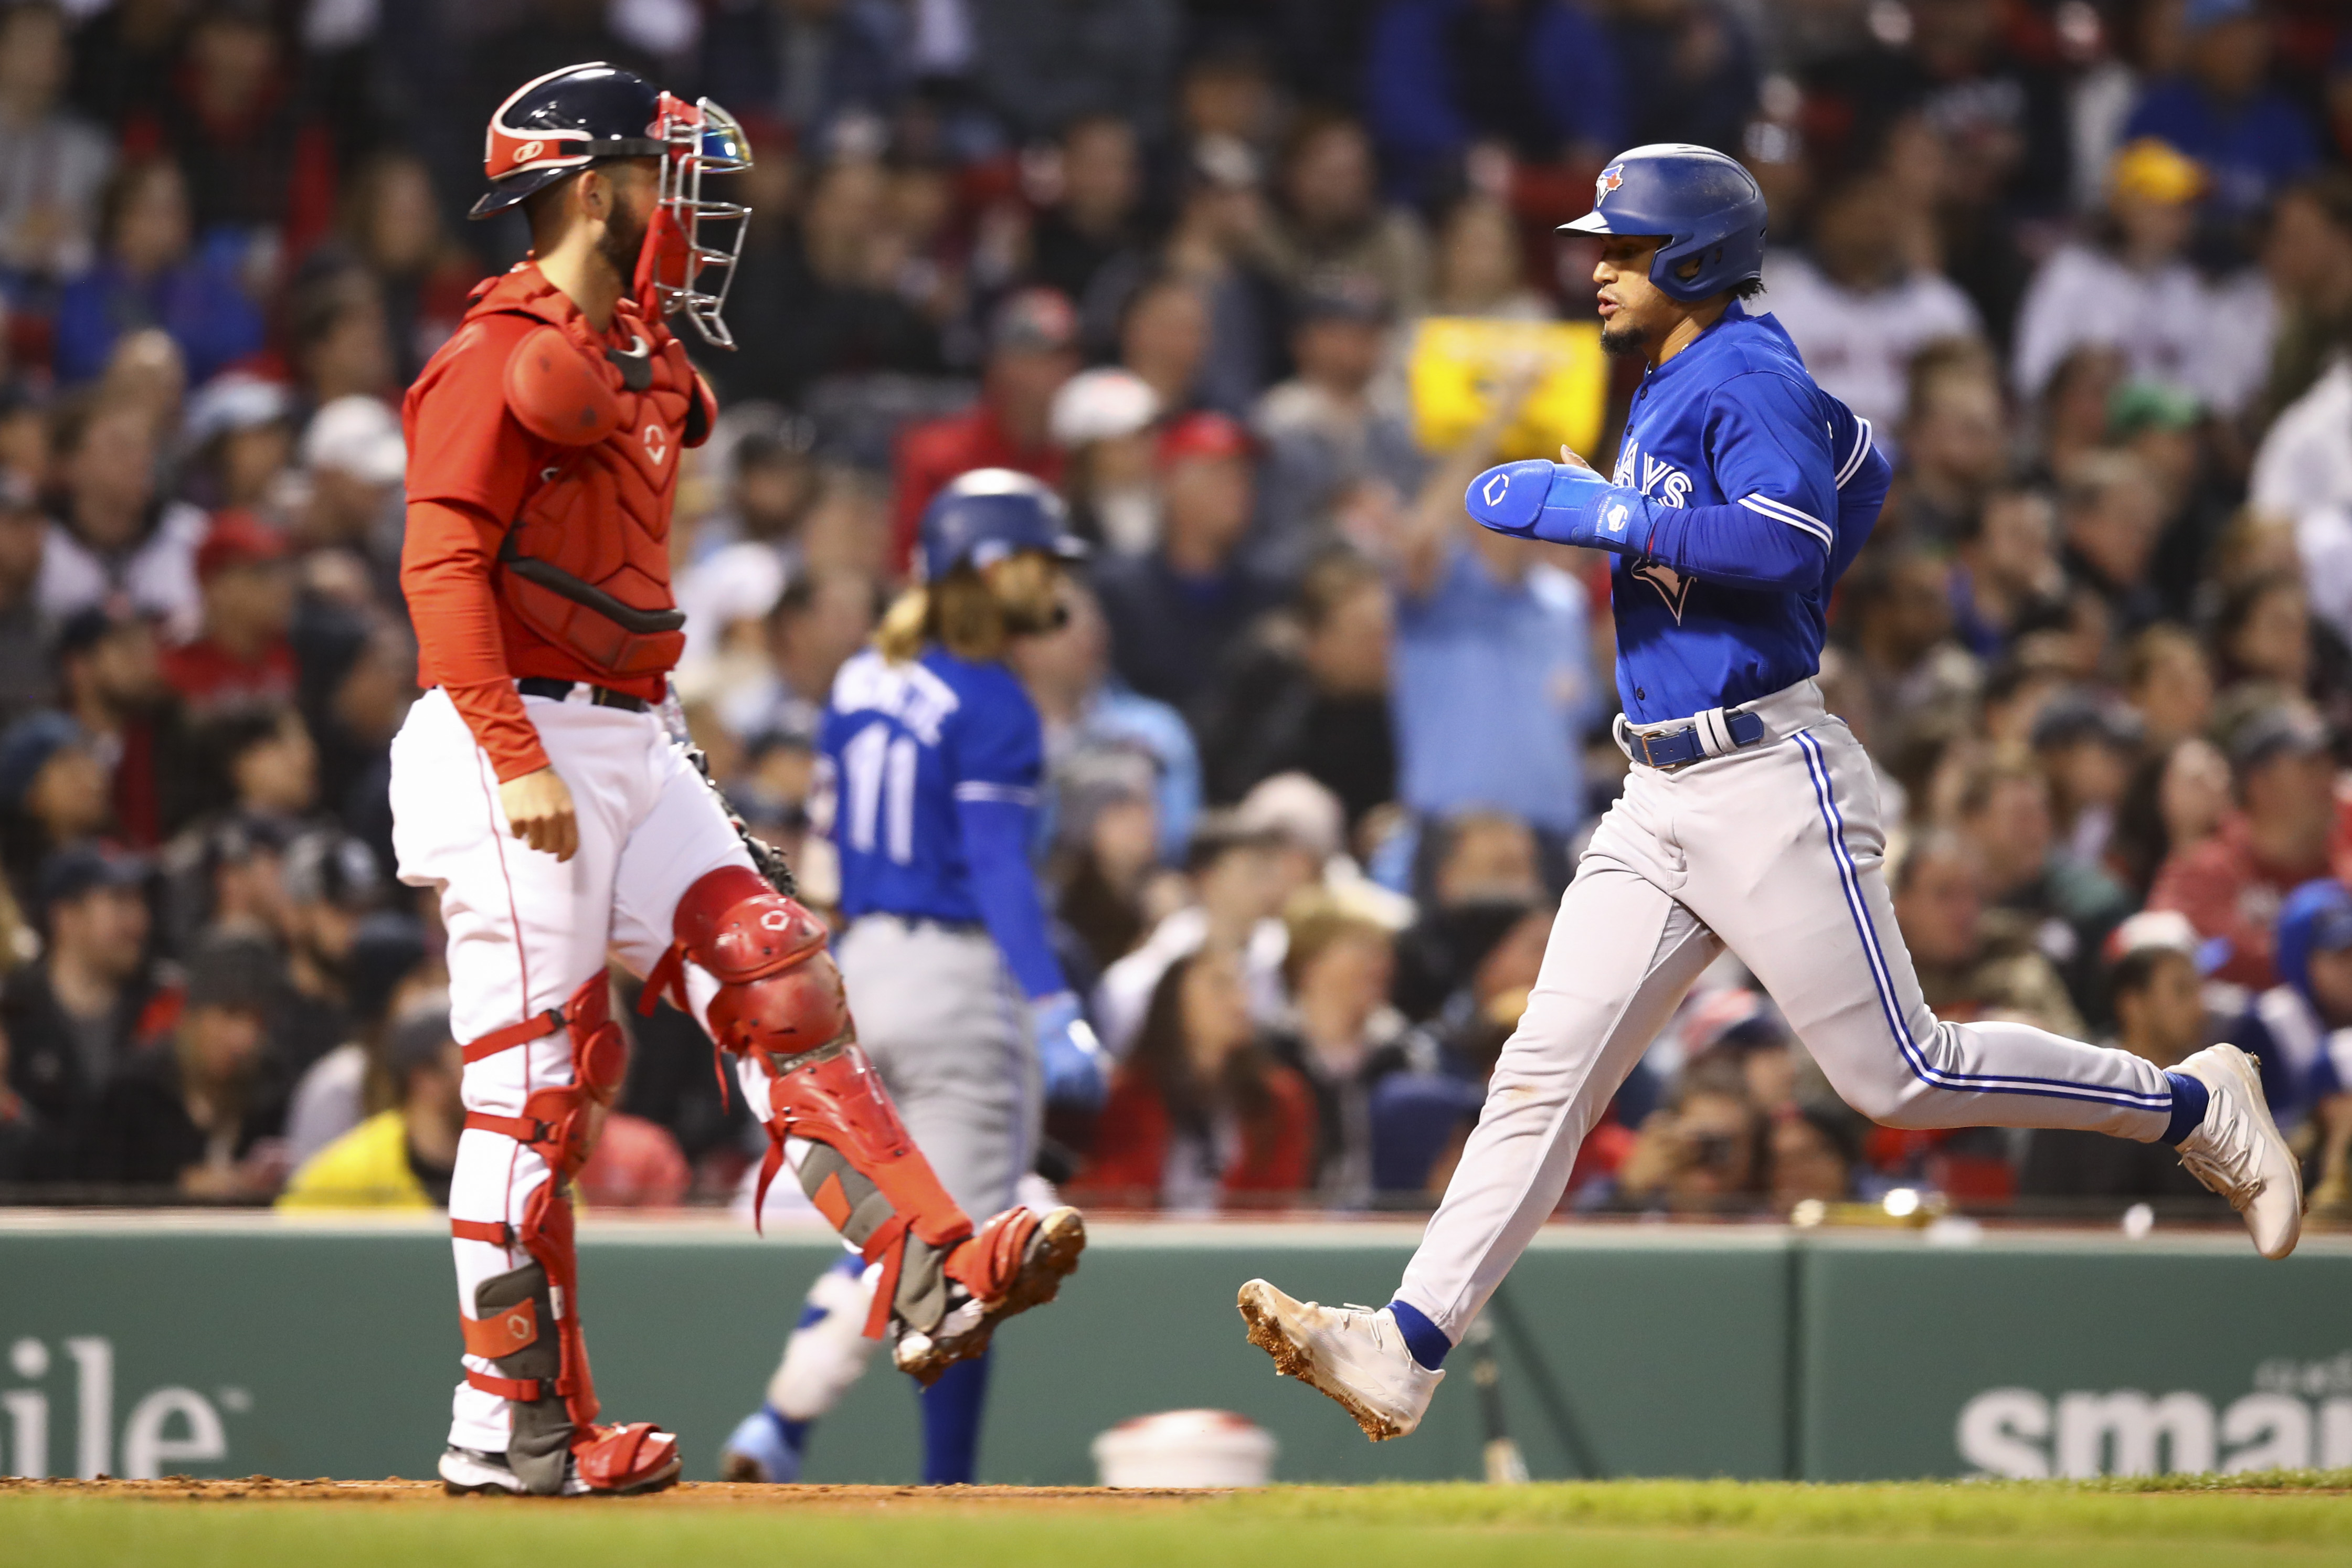 Tapia homer in 5-run second leads Blue Jays over Red Sox 6-1 - The